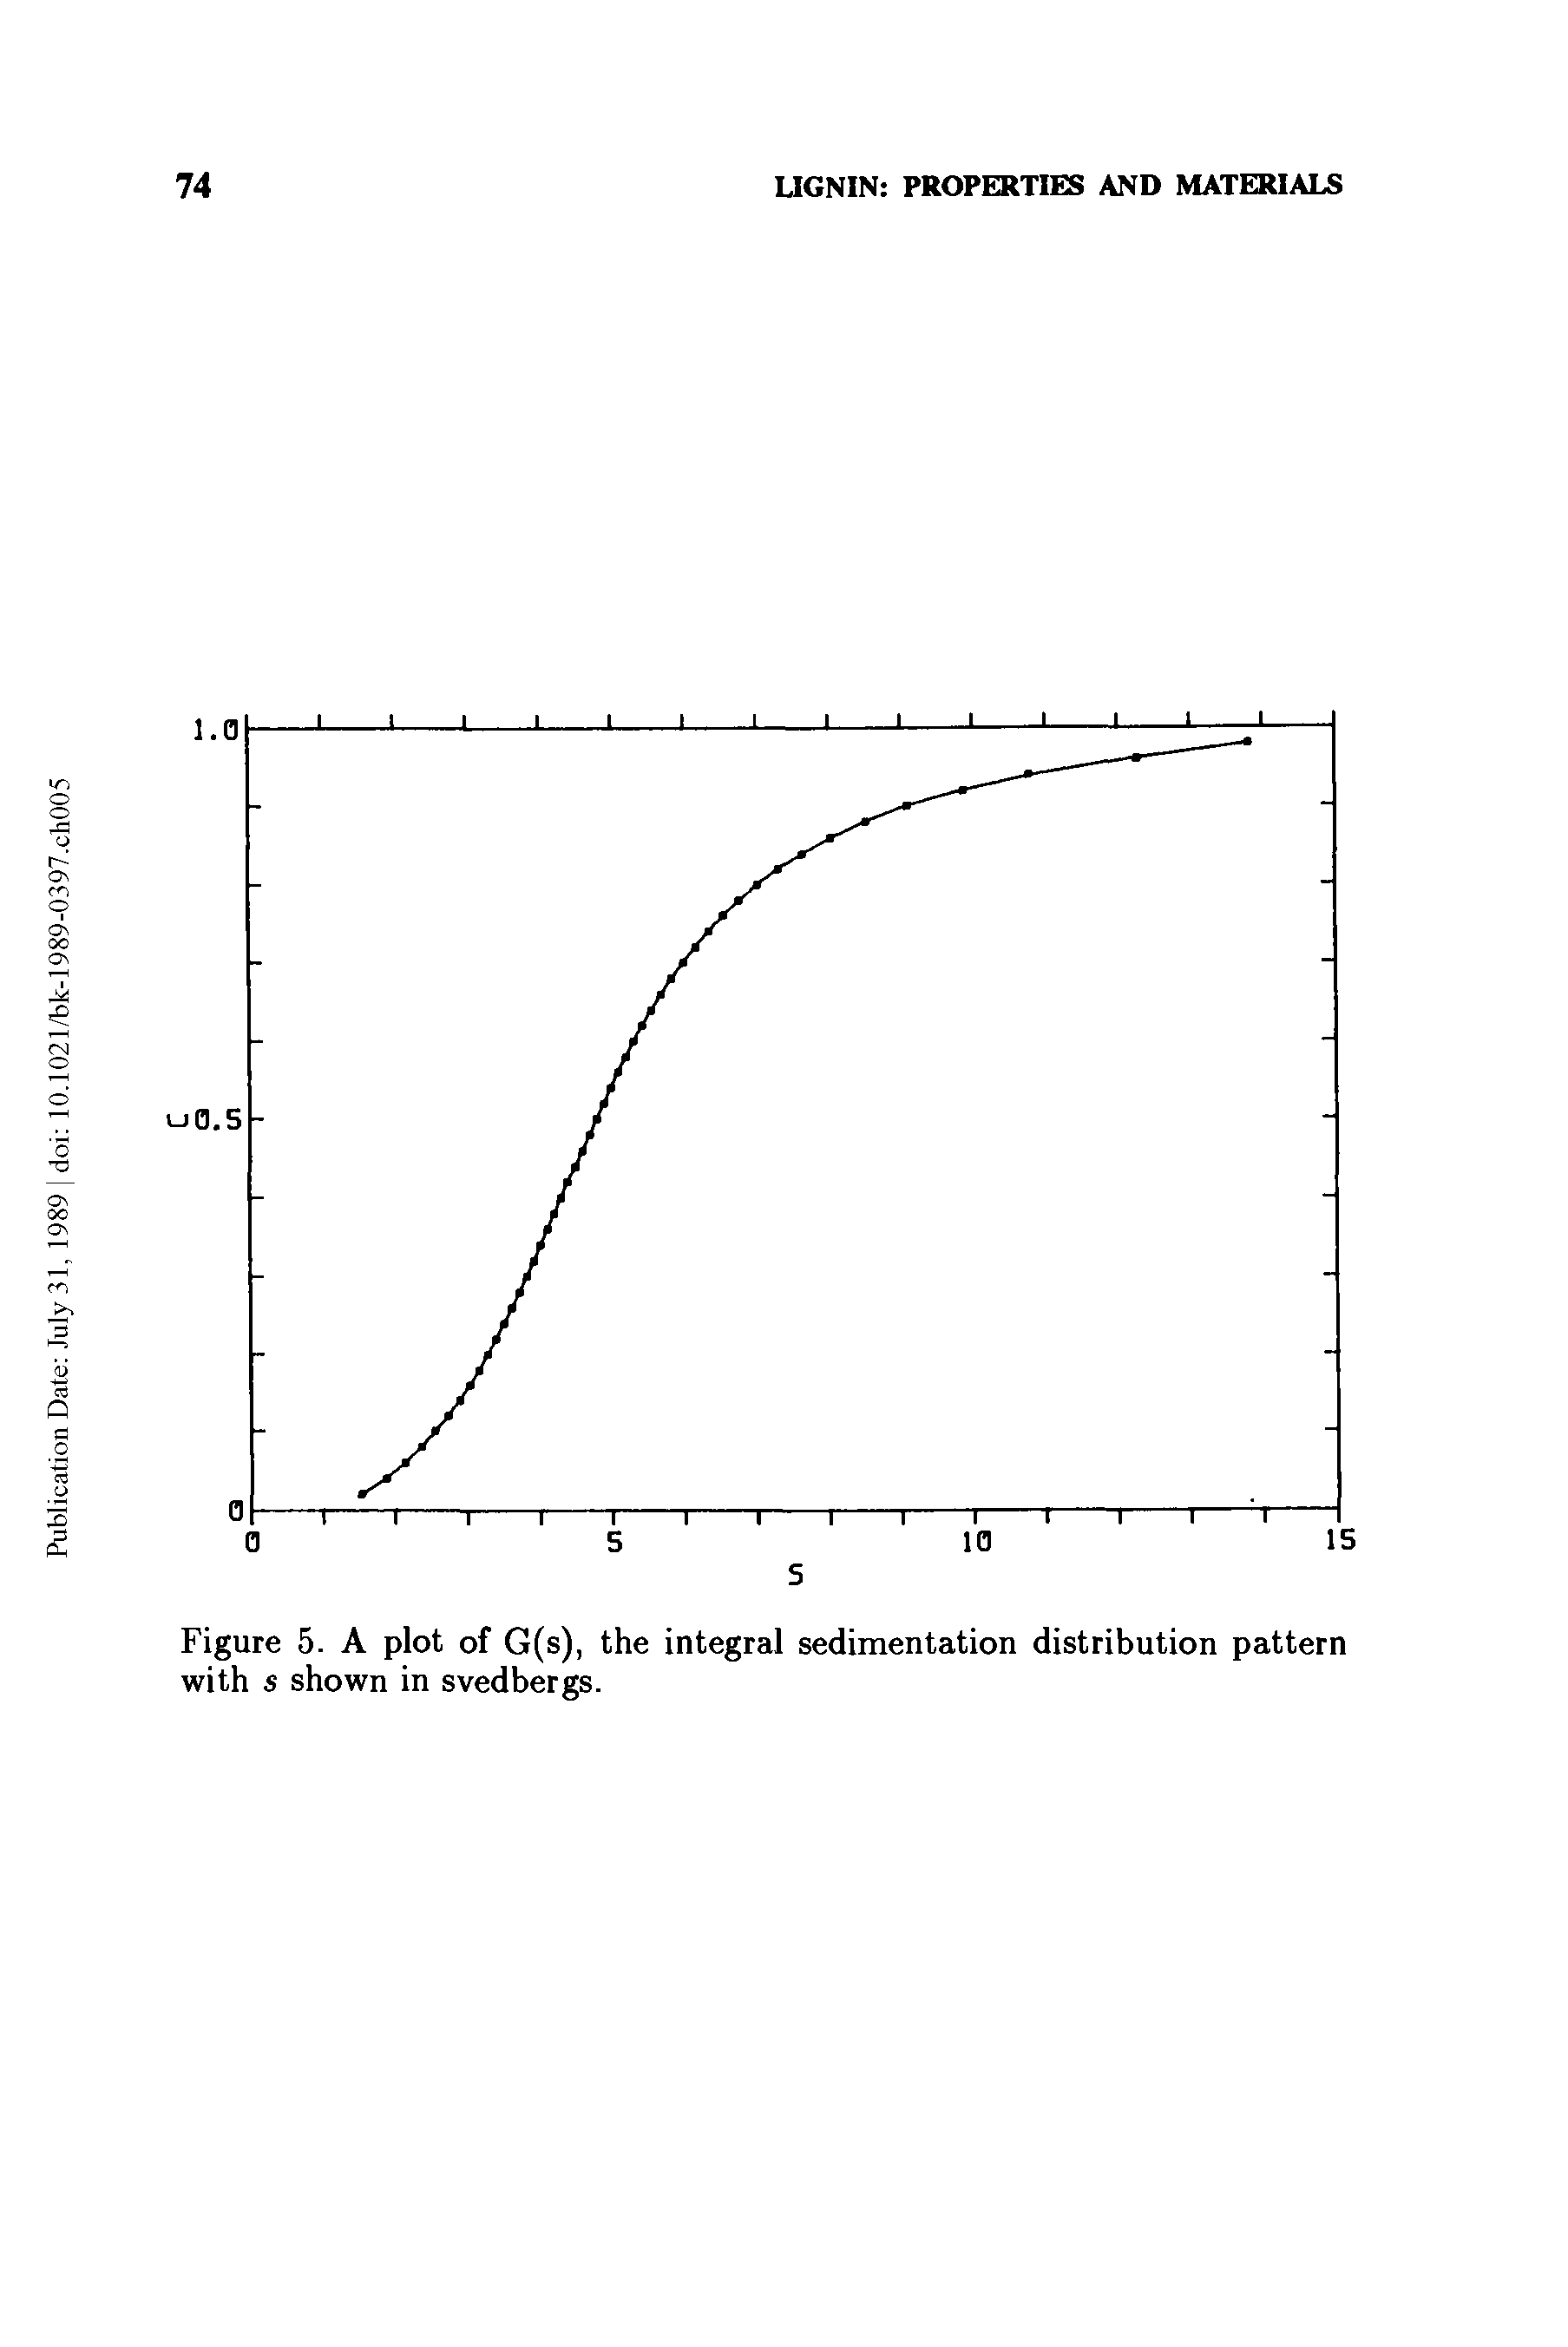 Figure 5. A plot of G(s), the integral sedimentation distribution pattern with s shown in svedbergs.